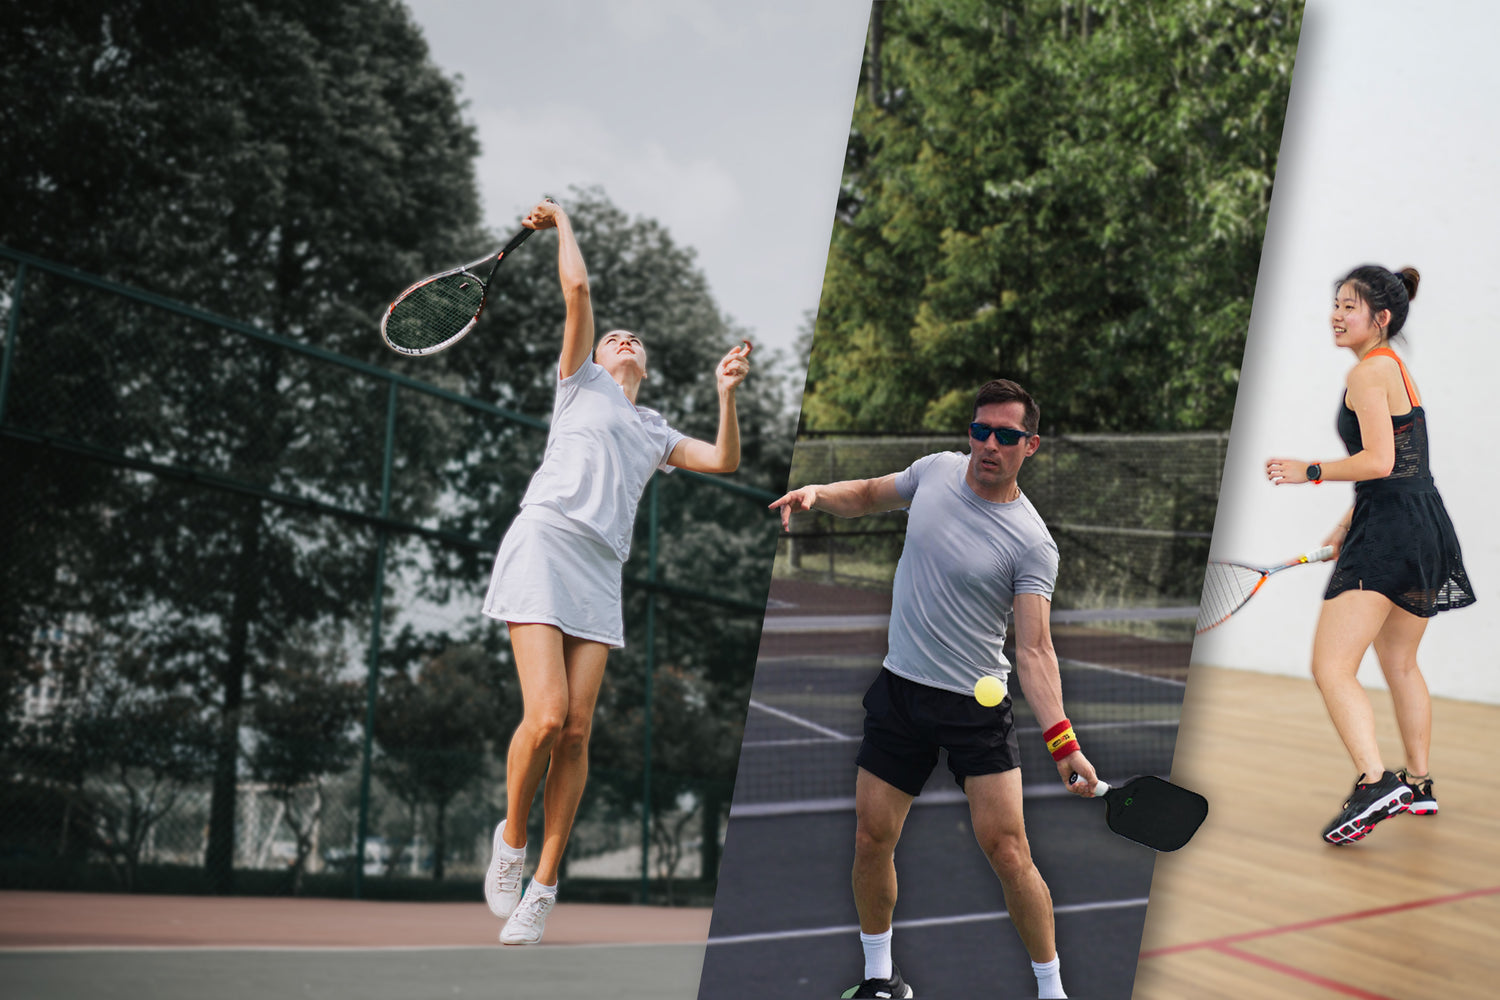 Get more power, explosiveness, and protect from injury with VKTRY Insoles for tennis, badminton, and pickle ball with VKTRY Insoles for racquet sports